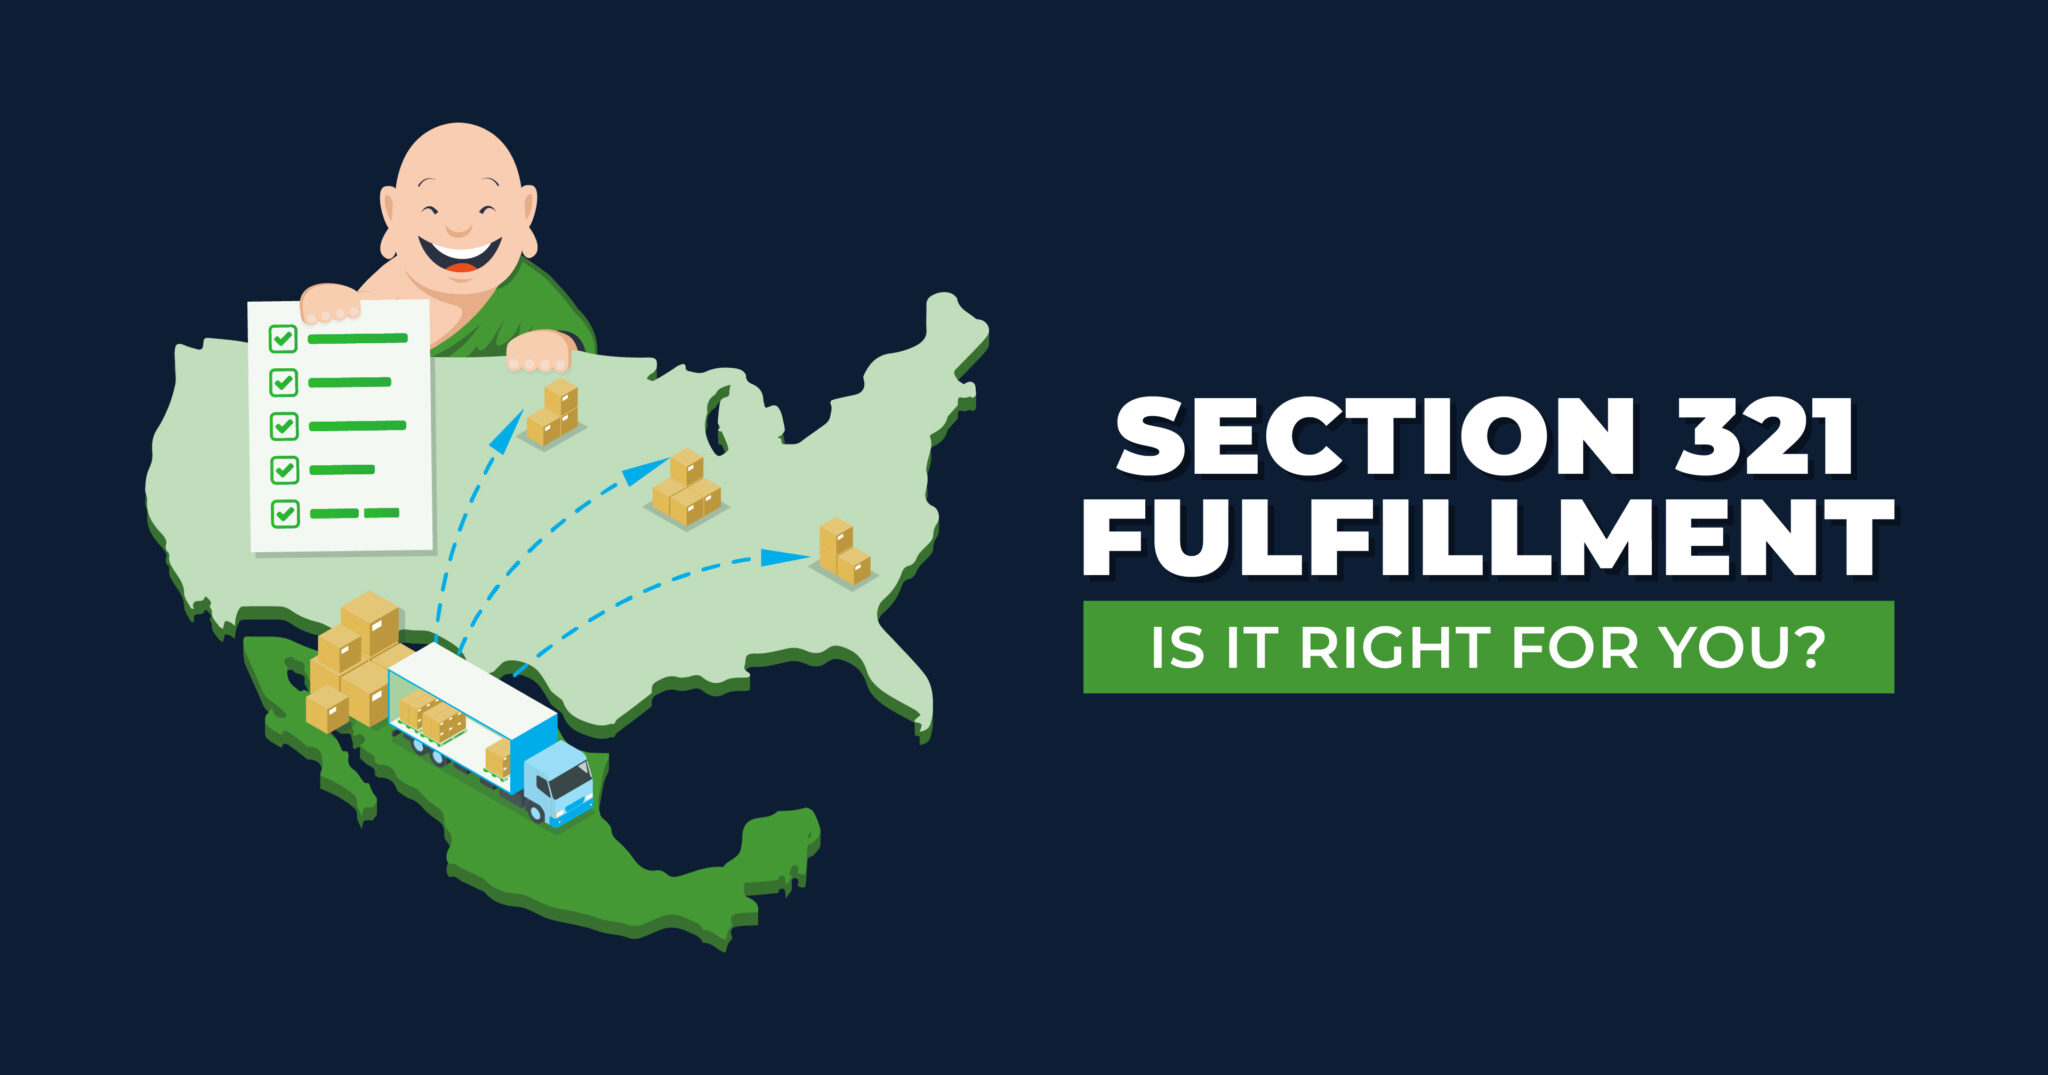 Section 321 Fulfillment: Is it Right for You?